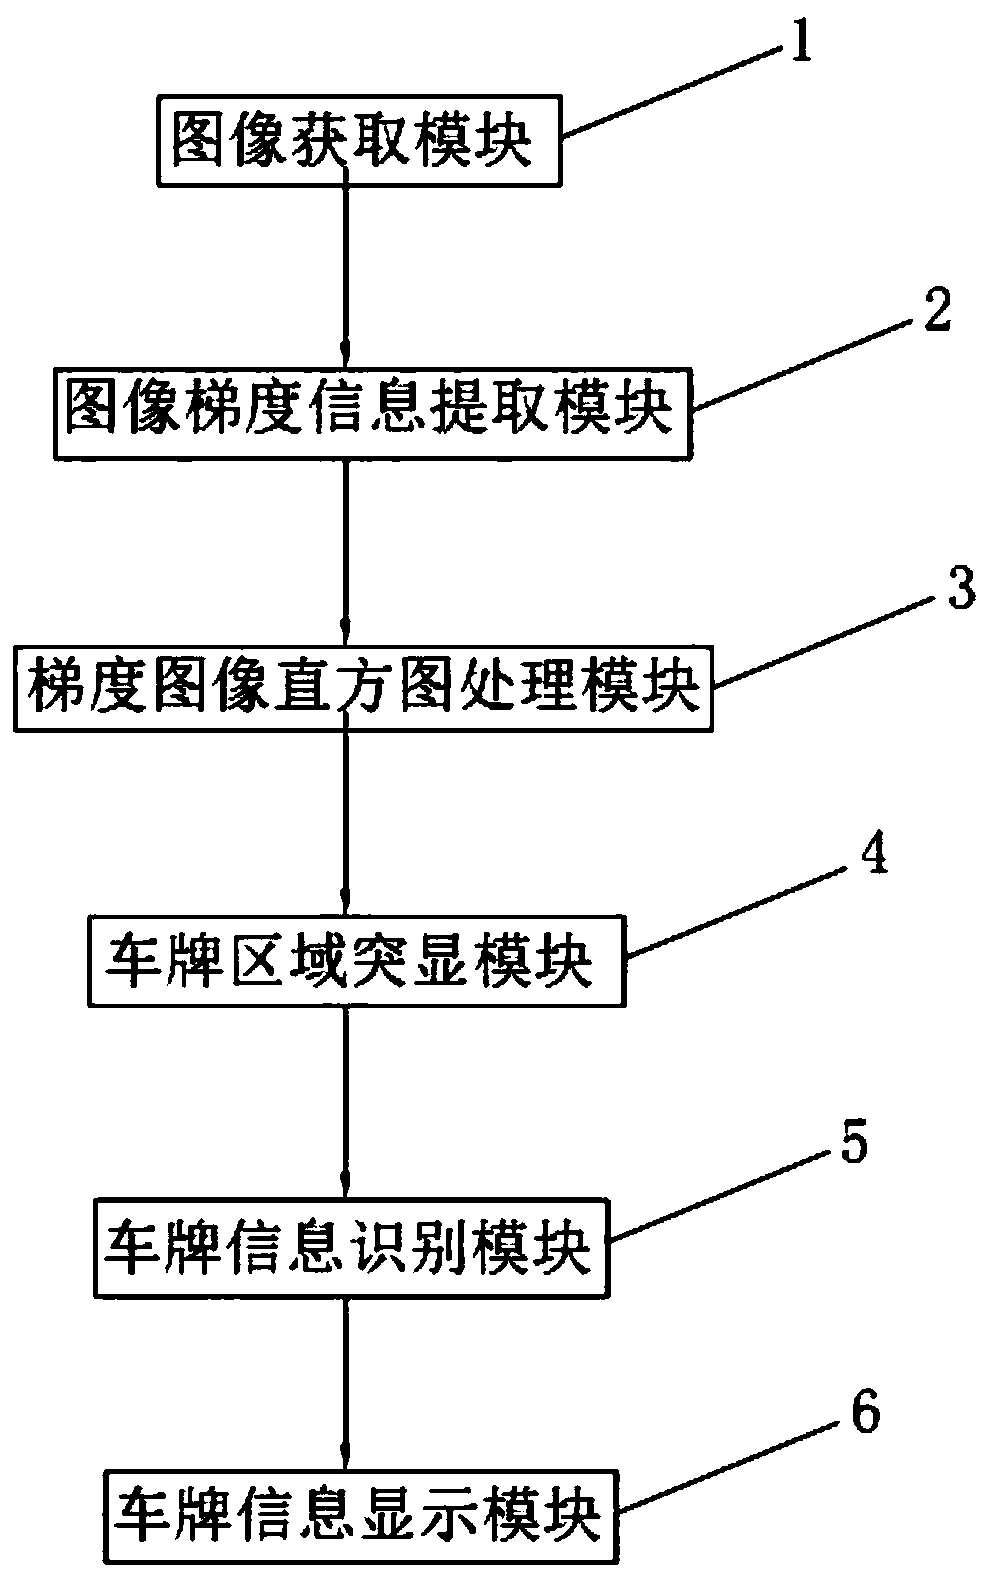 A license plate recognition system and a recognition method